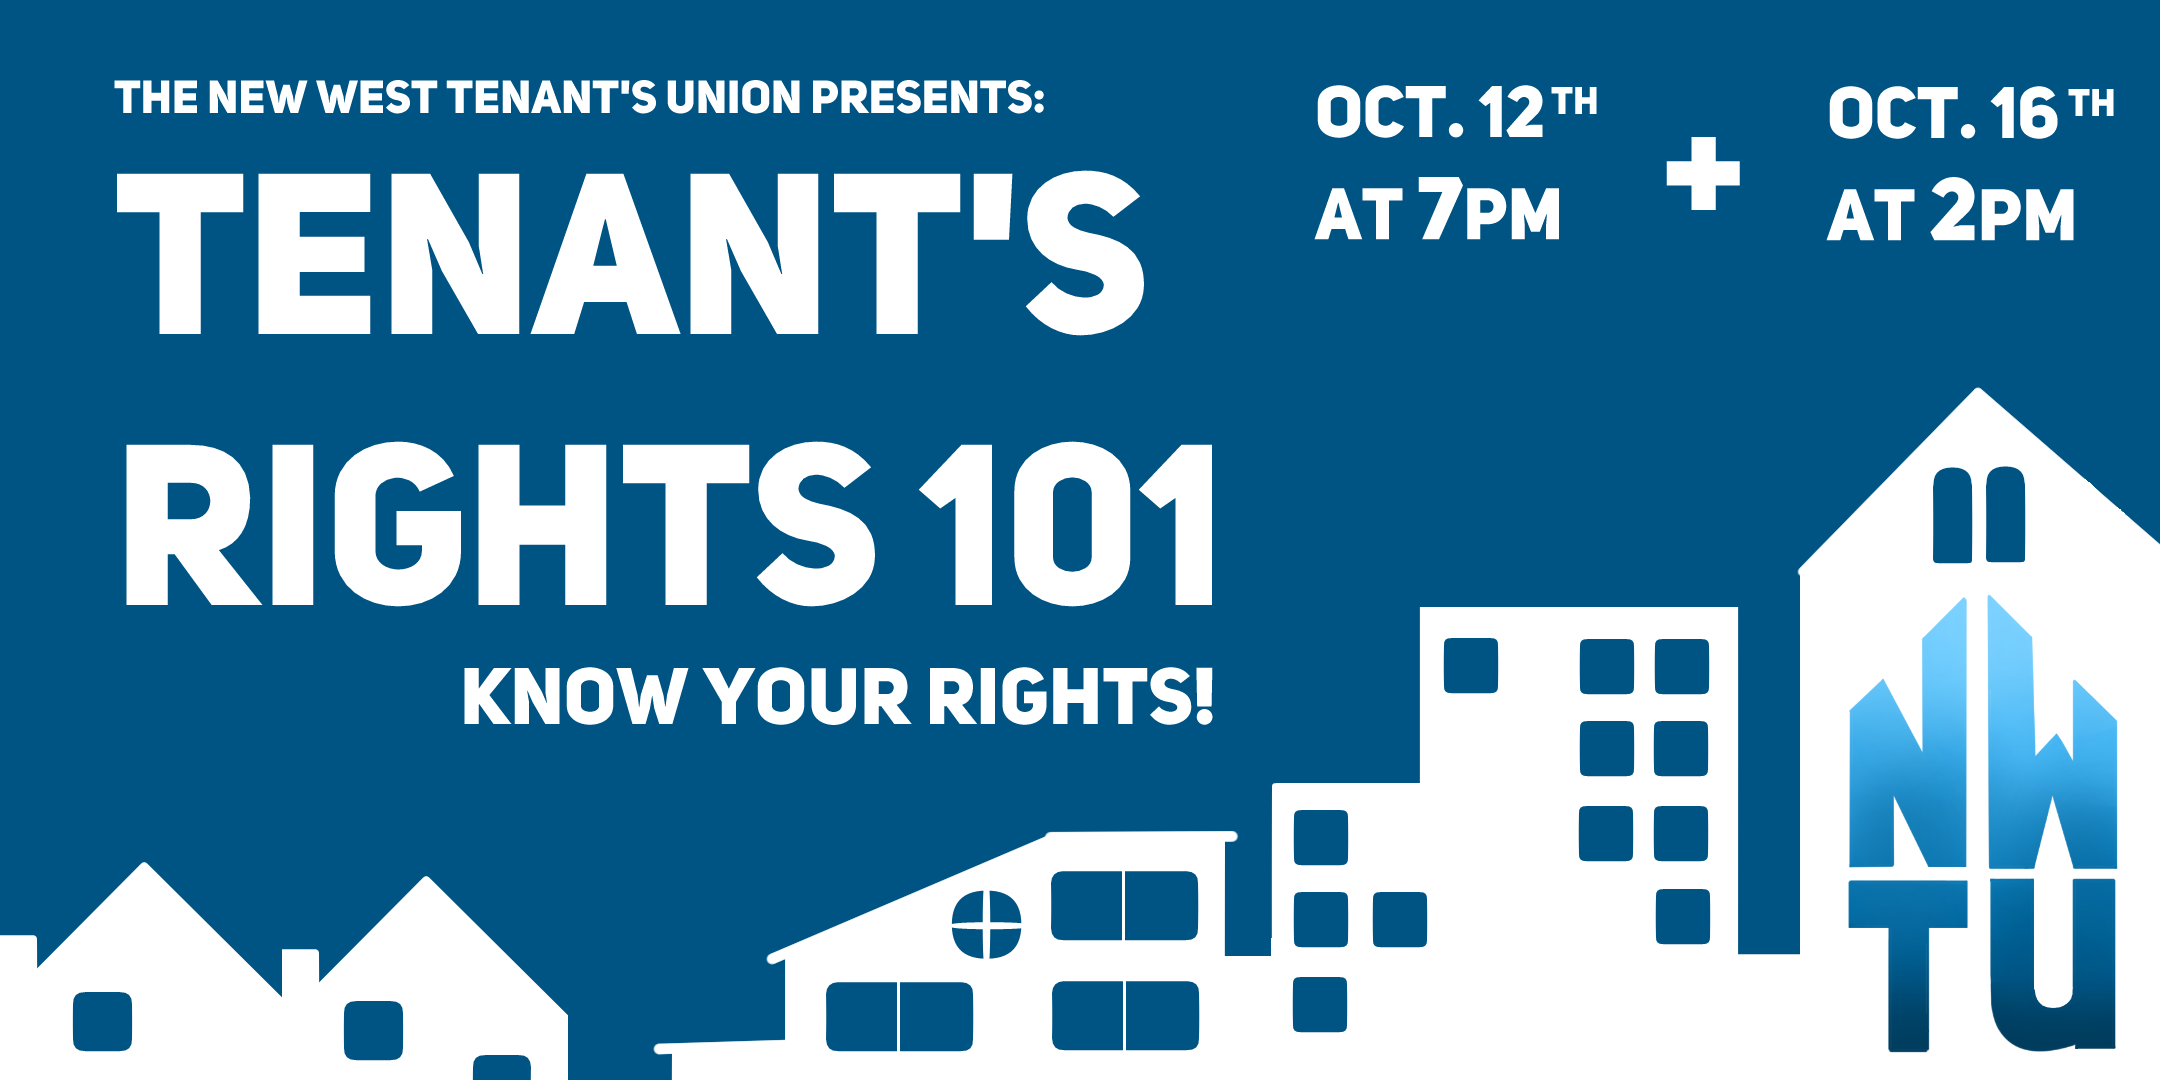 The New West Tenant's Union Presents: Tenant's Rights 101. Oct 12th at 7pm and Oct 16th at 2pm